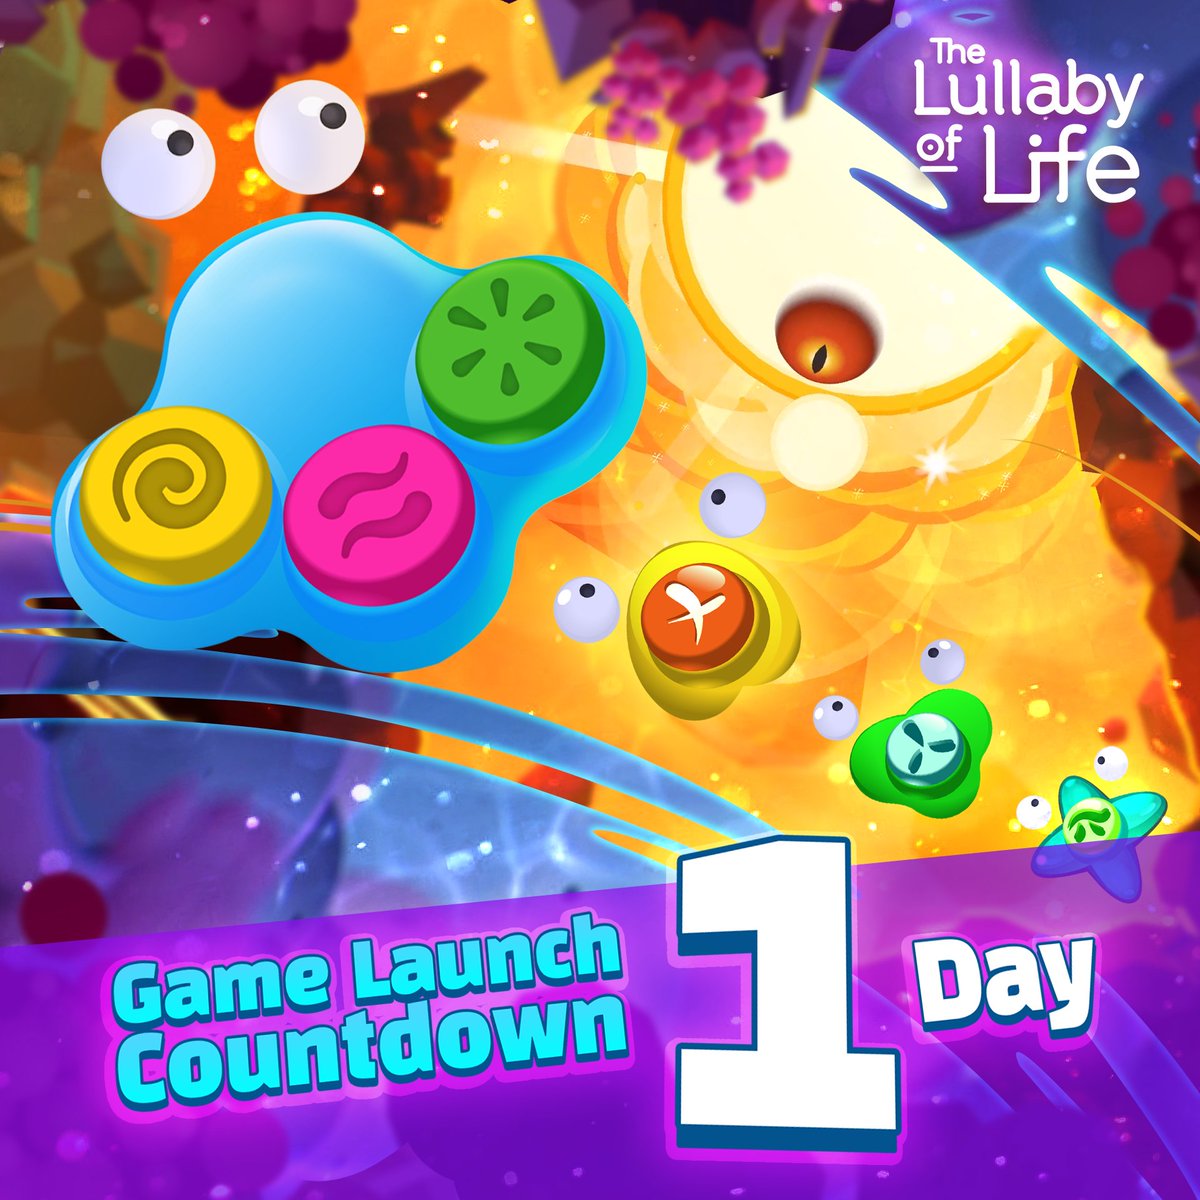 We're just 1 day away from The Lullaby of Life launching on PC! 🧩Challenging puzzles solved with sound and timing 🎧A hypnotic and tranquil soundtrack 🌠Colorful environments based on the origins of the universe Wishlist Now!⬇️ bit.ly/3xSbIXh